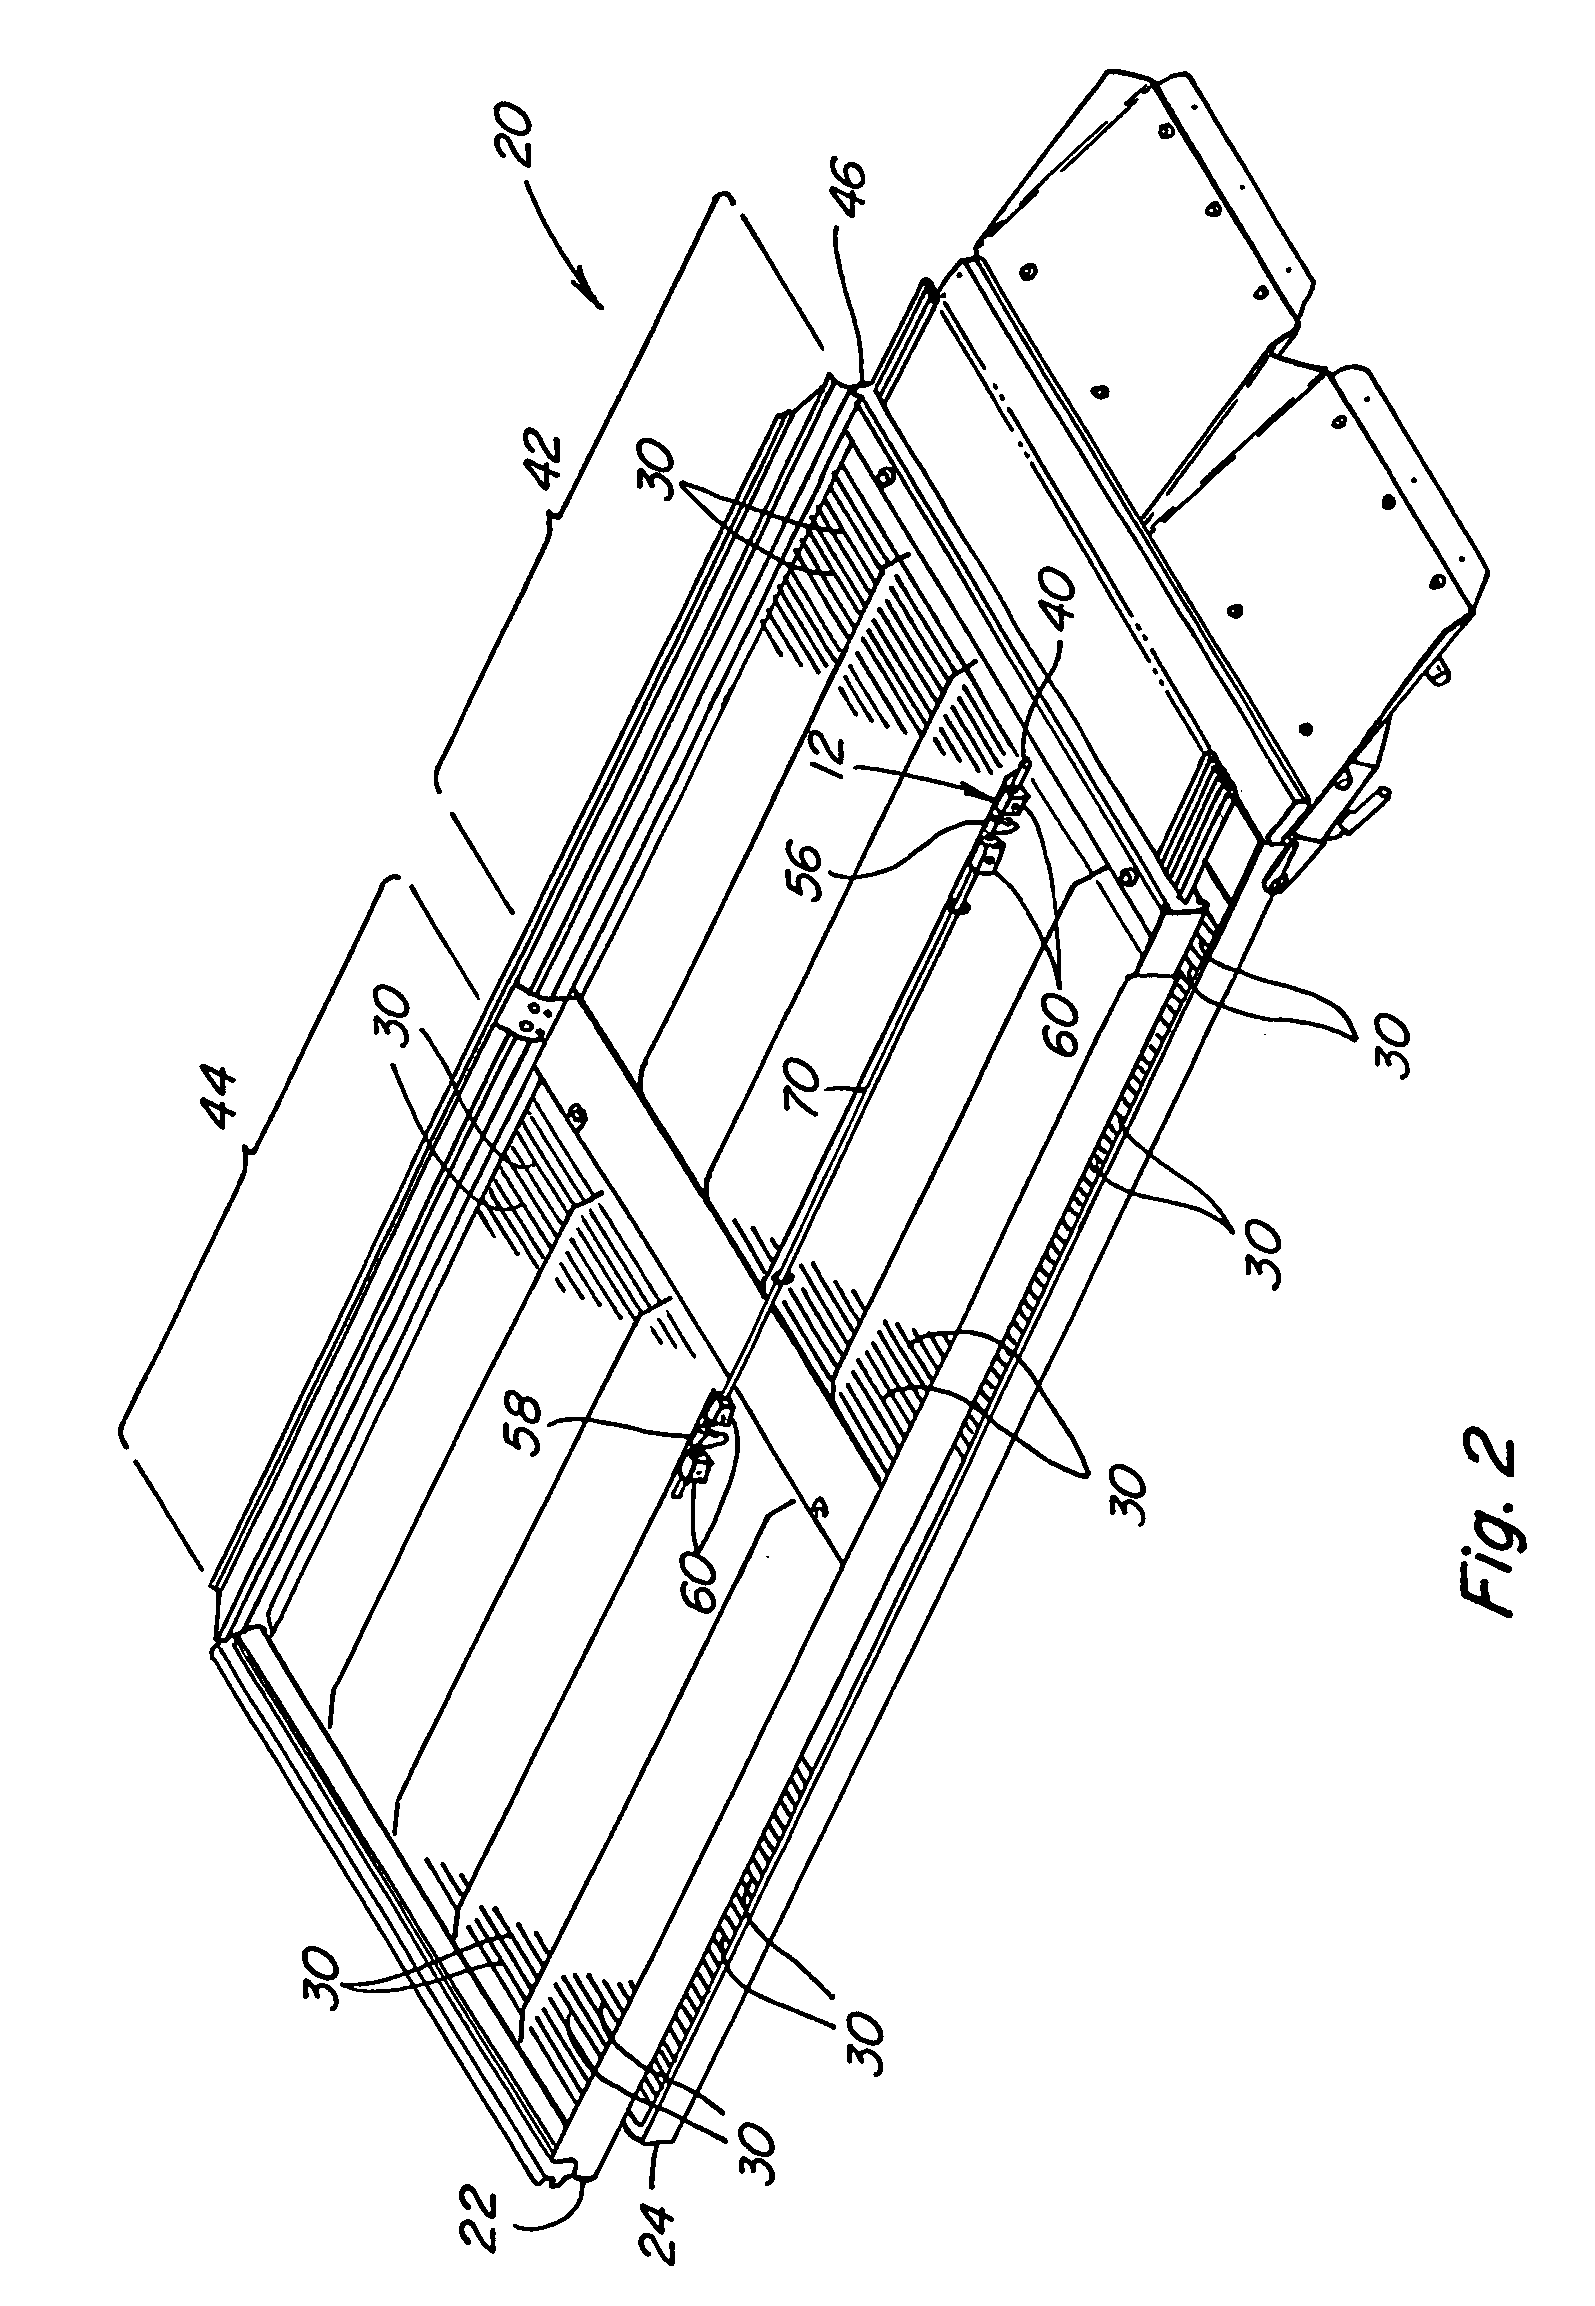 Sieve adjustment mechanism for an agricultural combine